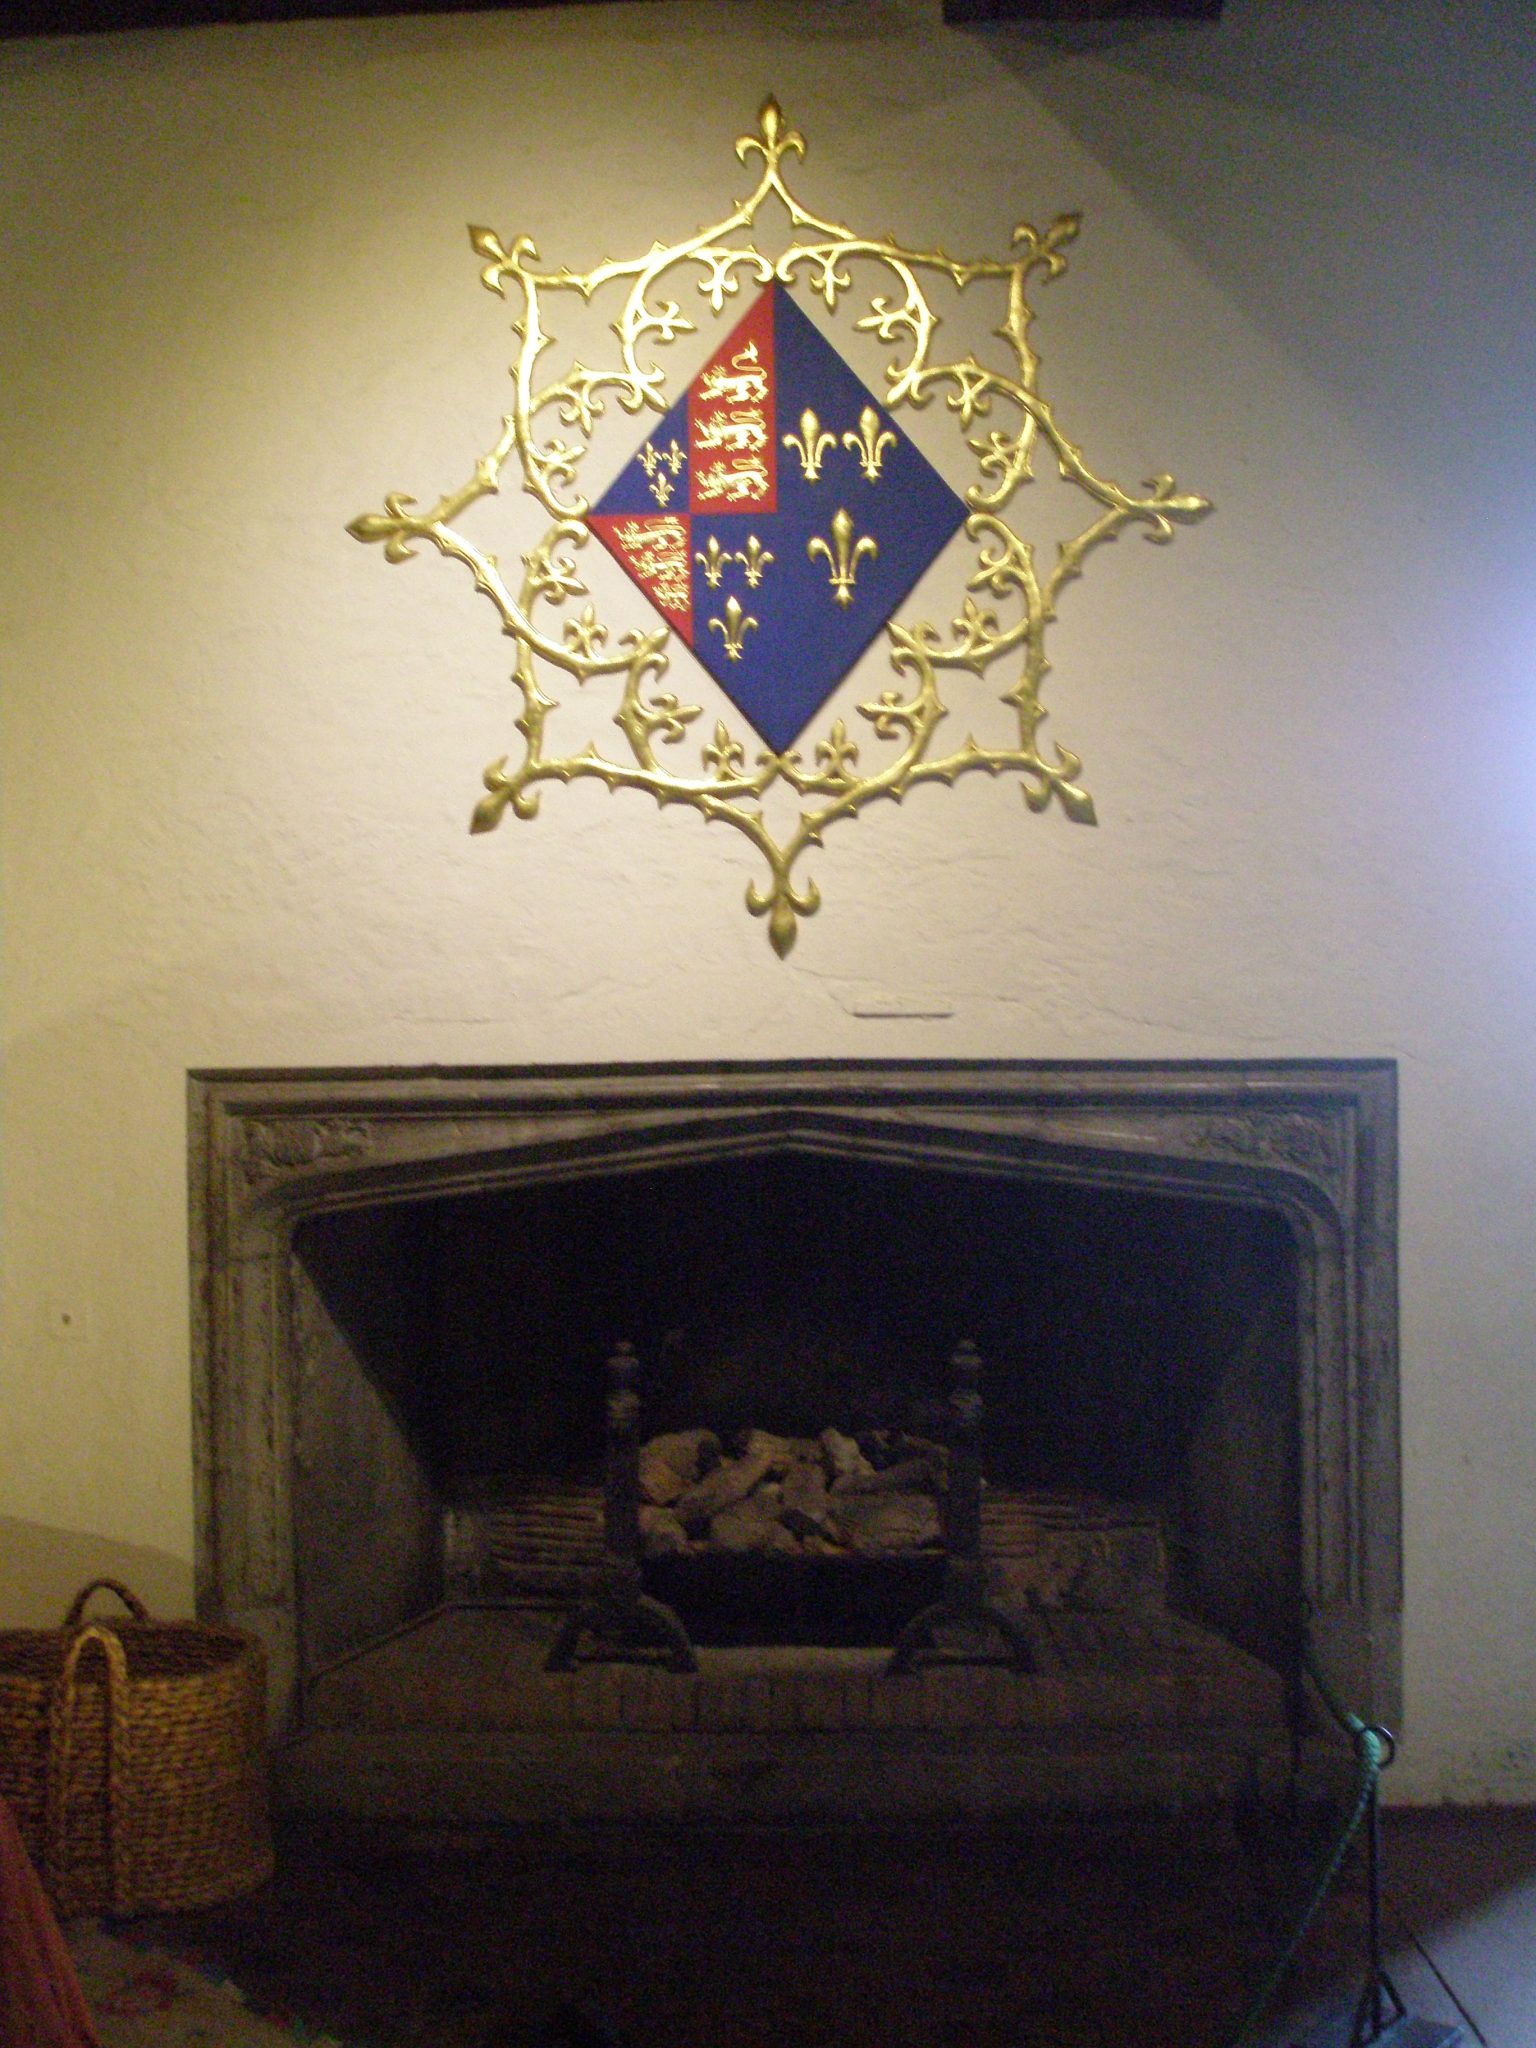 In the Queen's Room, named for Henry V's French wife Catherine de Valois, Queen Catherine's coat of arms decorates the hearth.